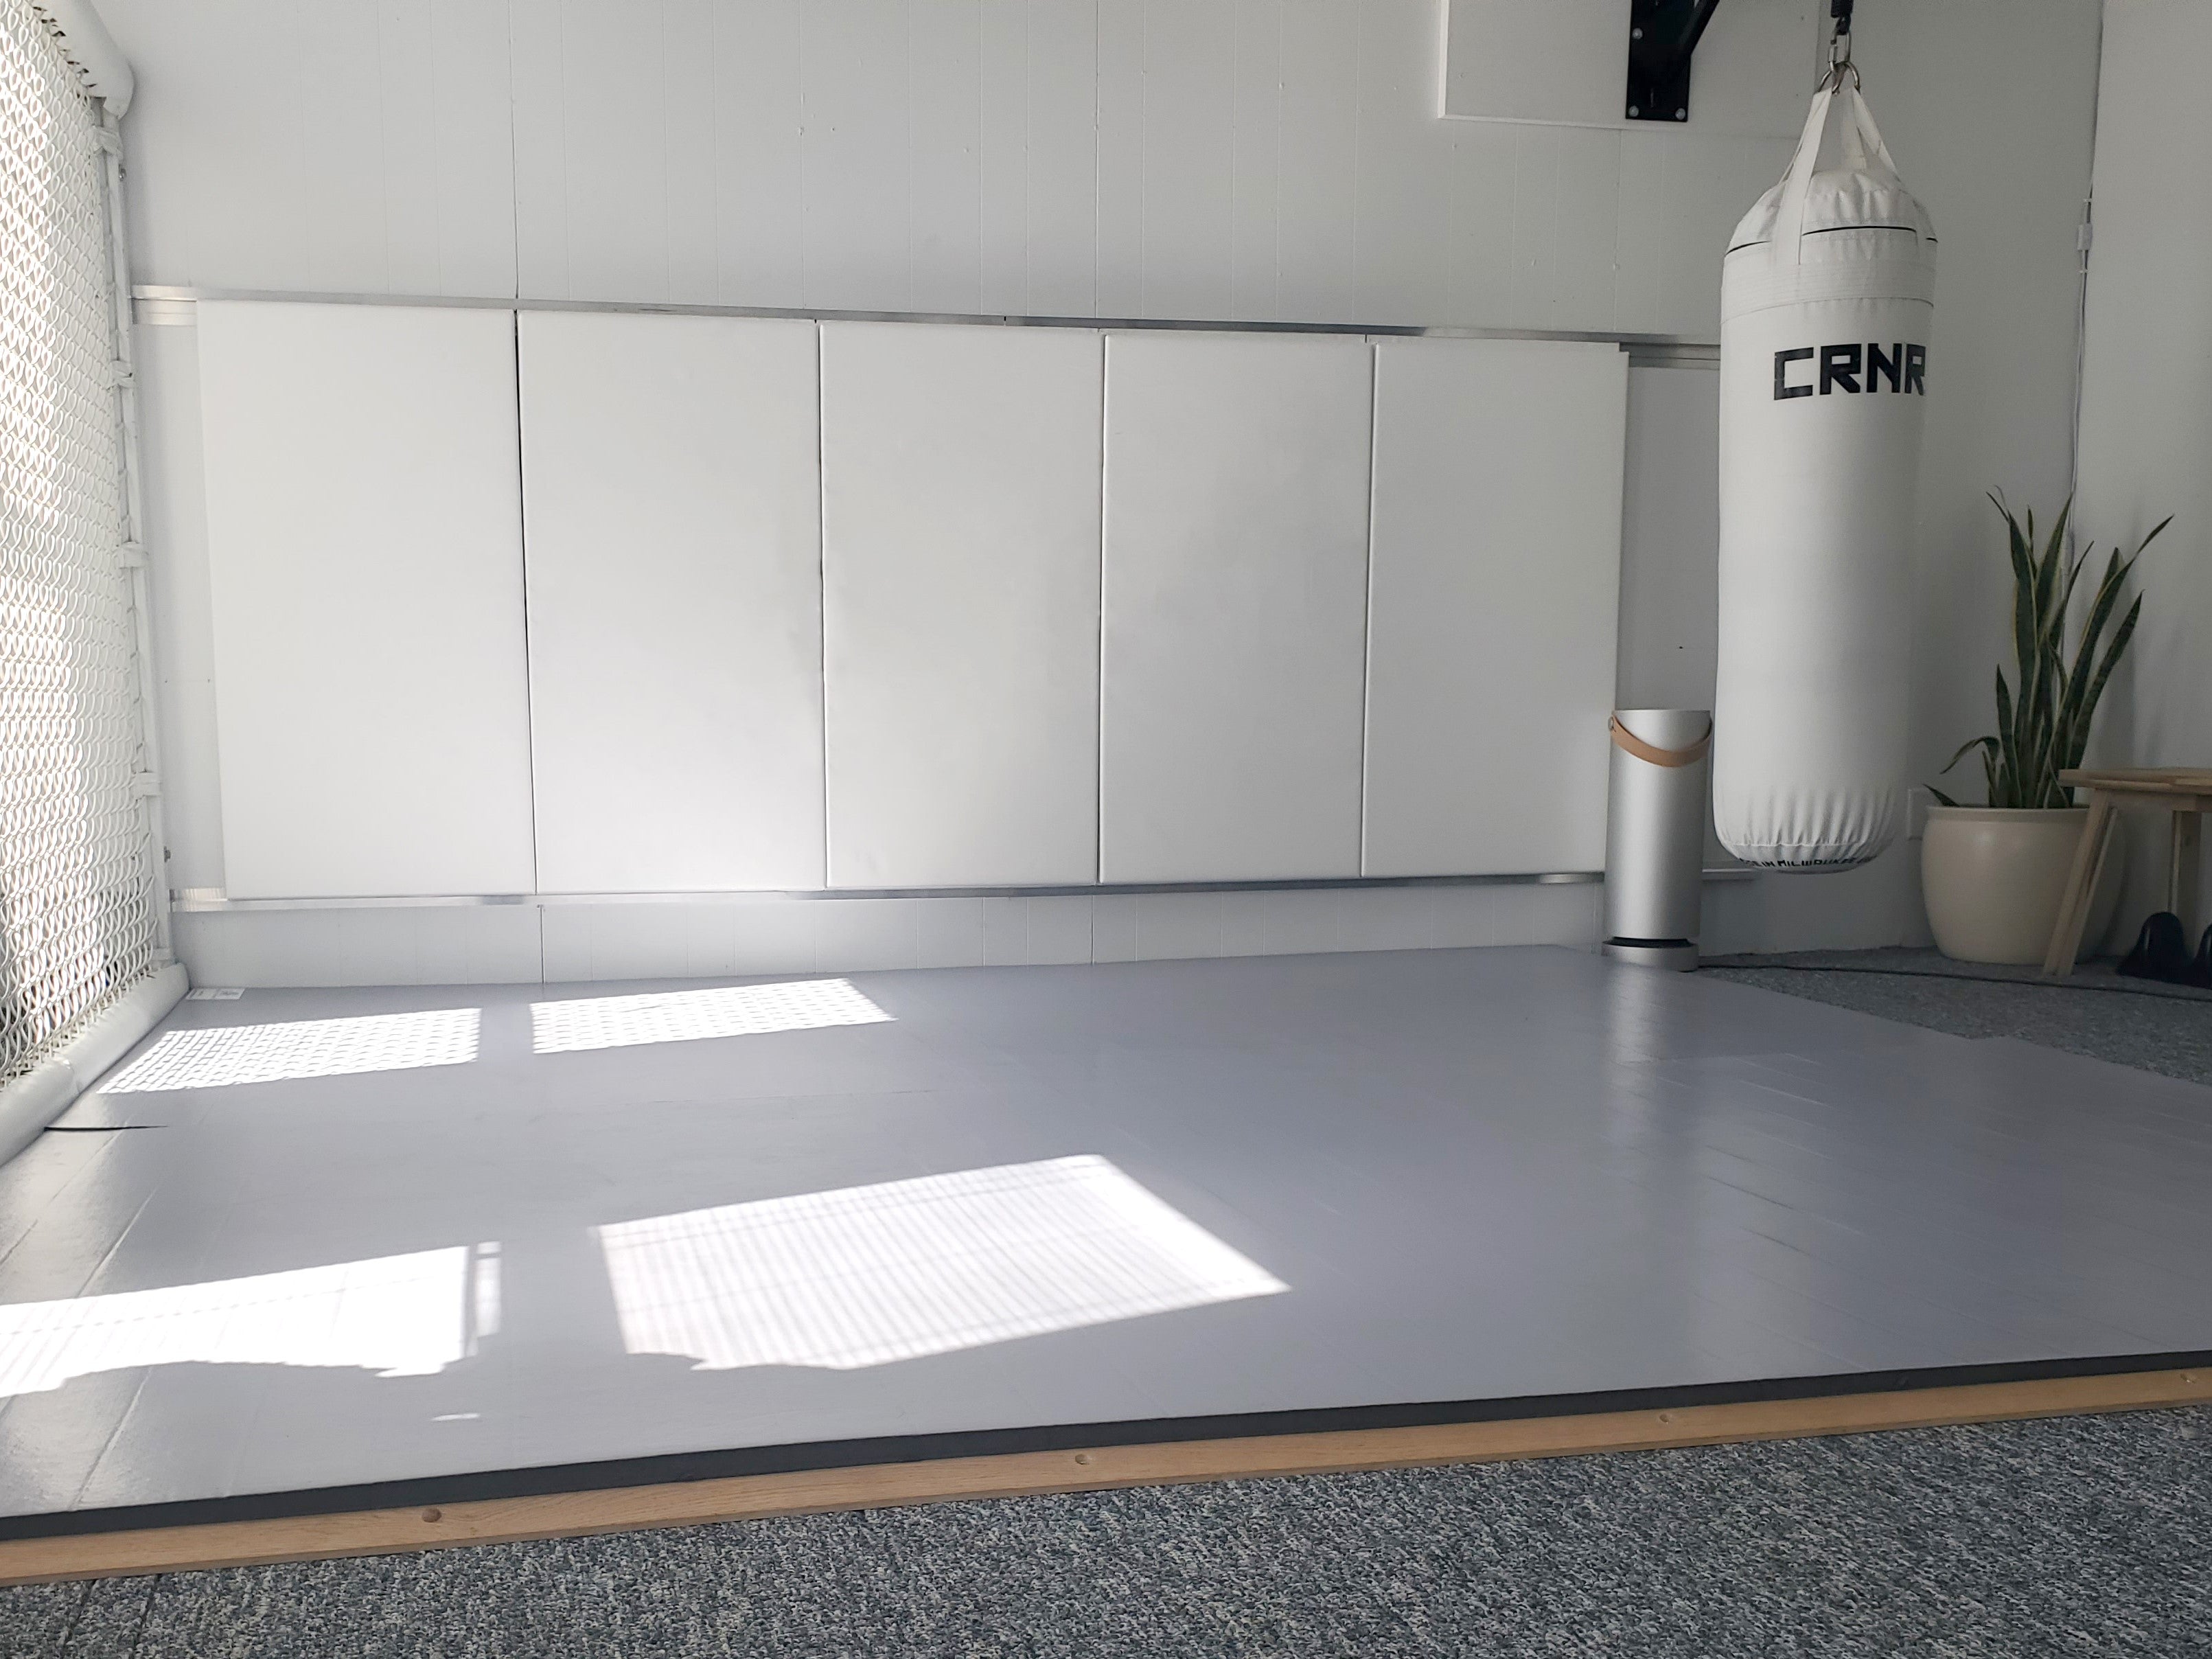 Home martial arts room with grey wrestling mats and white wall pads